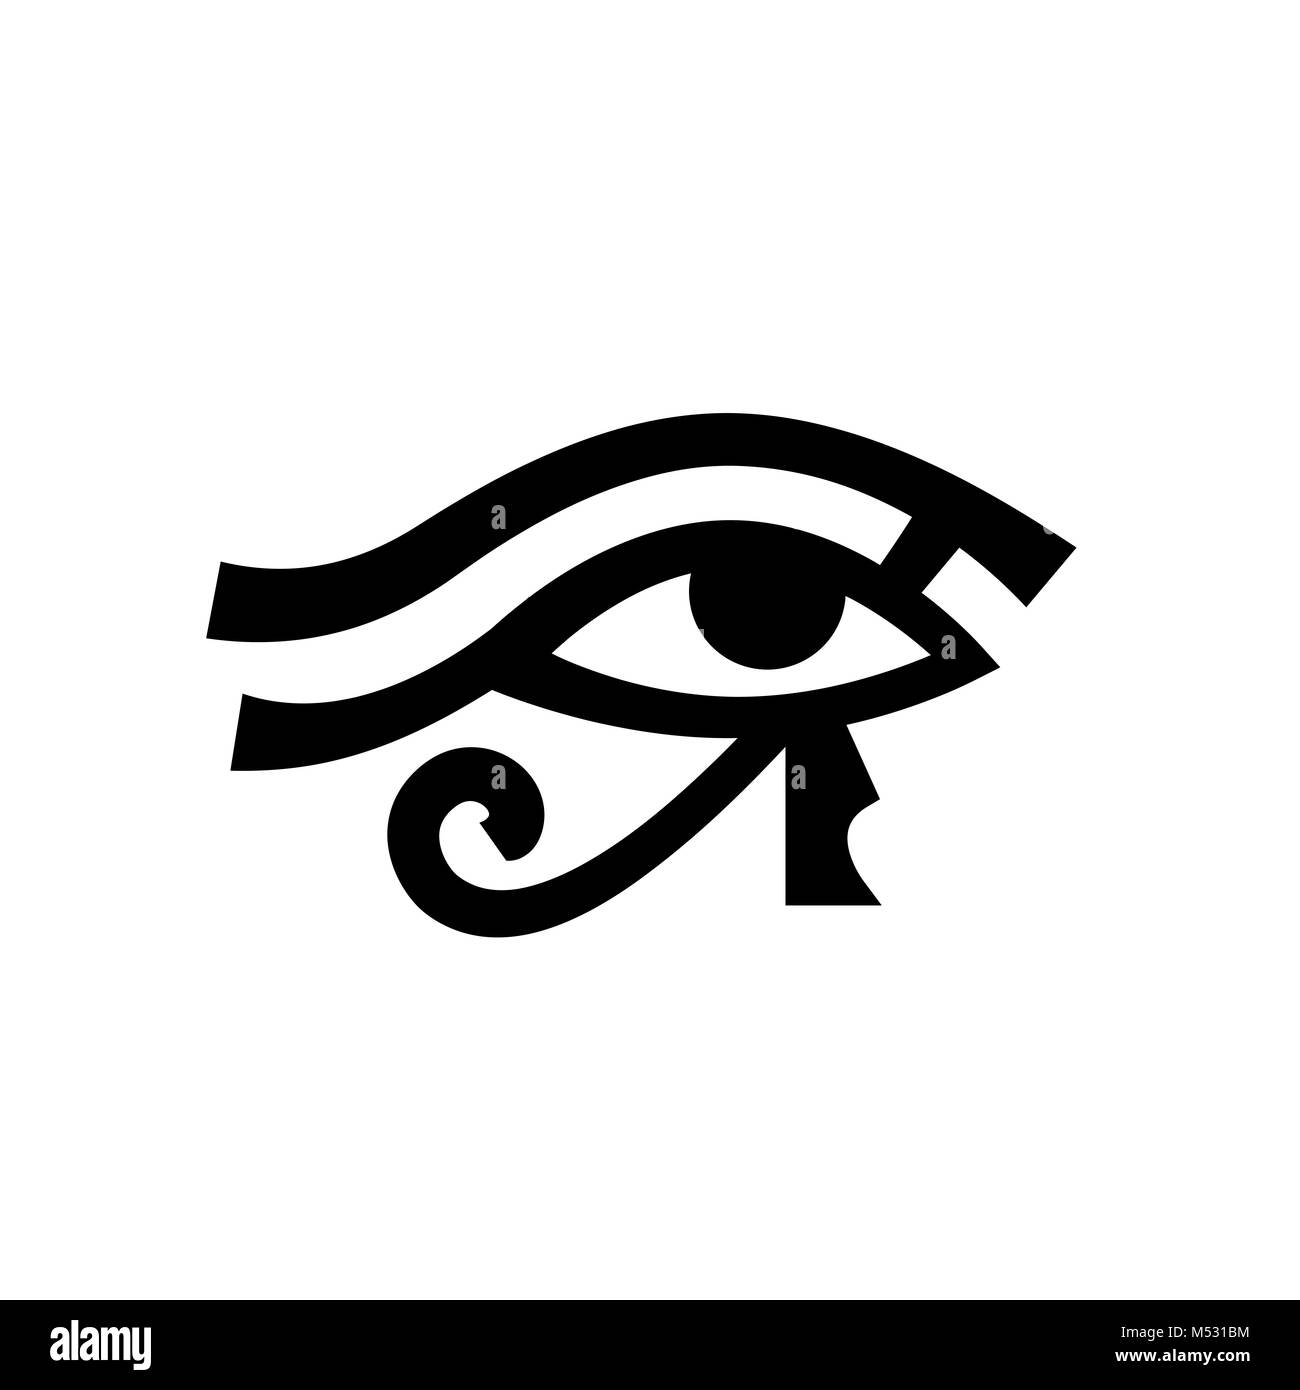 50 Ancient Eye of Ra Tattoo Ideas  Your Protection and Power